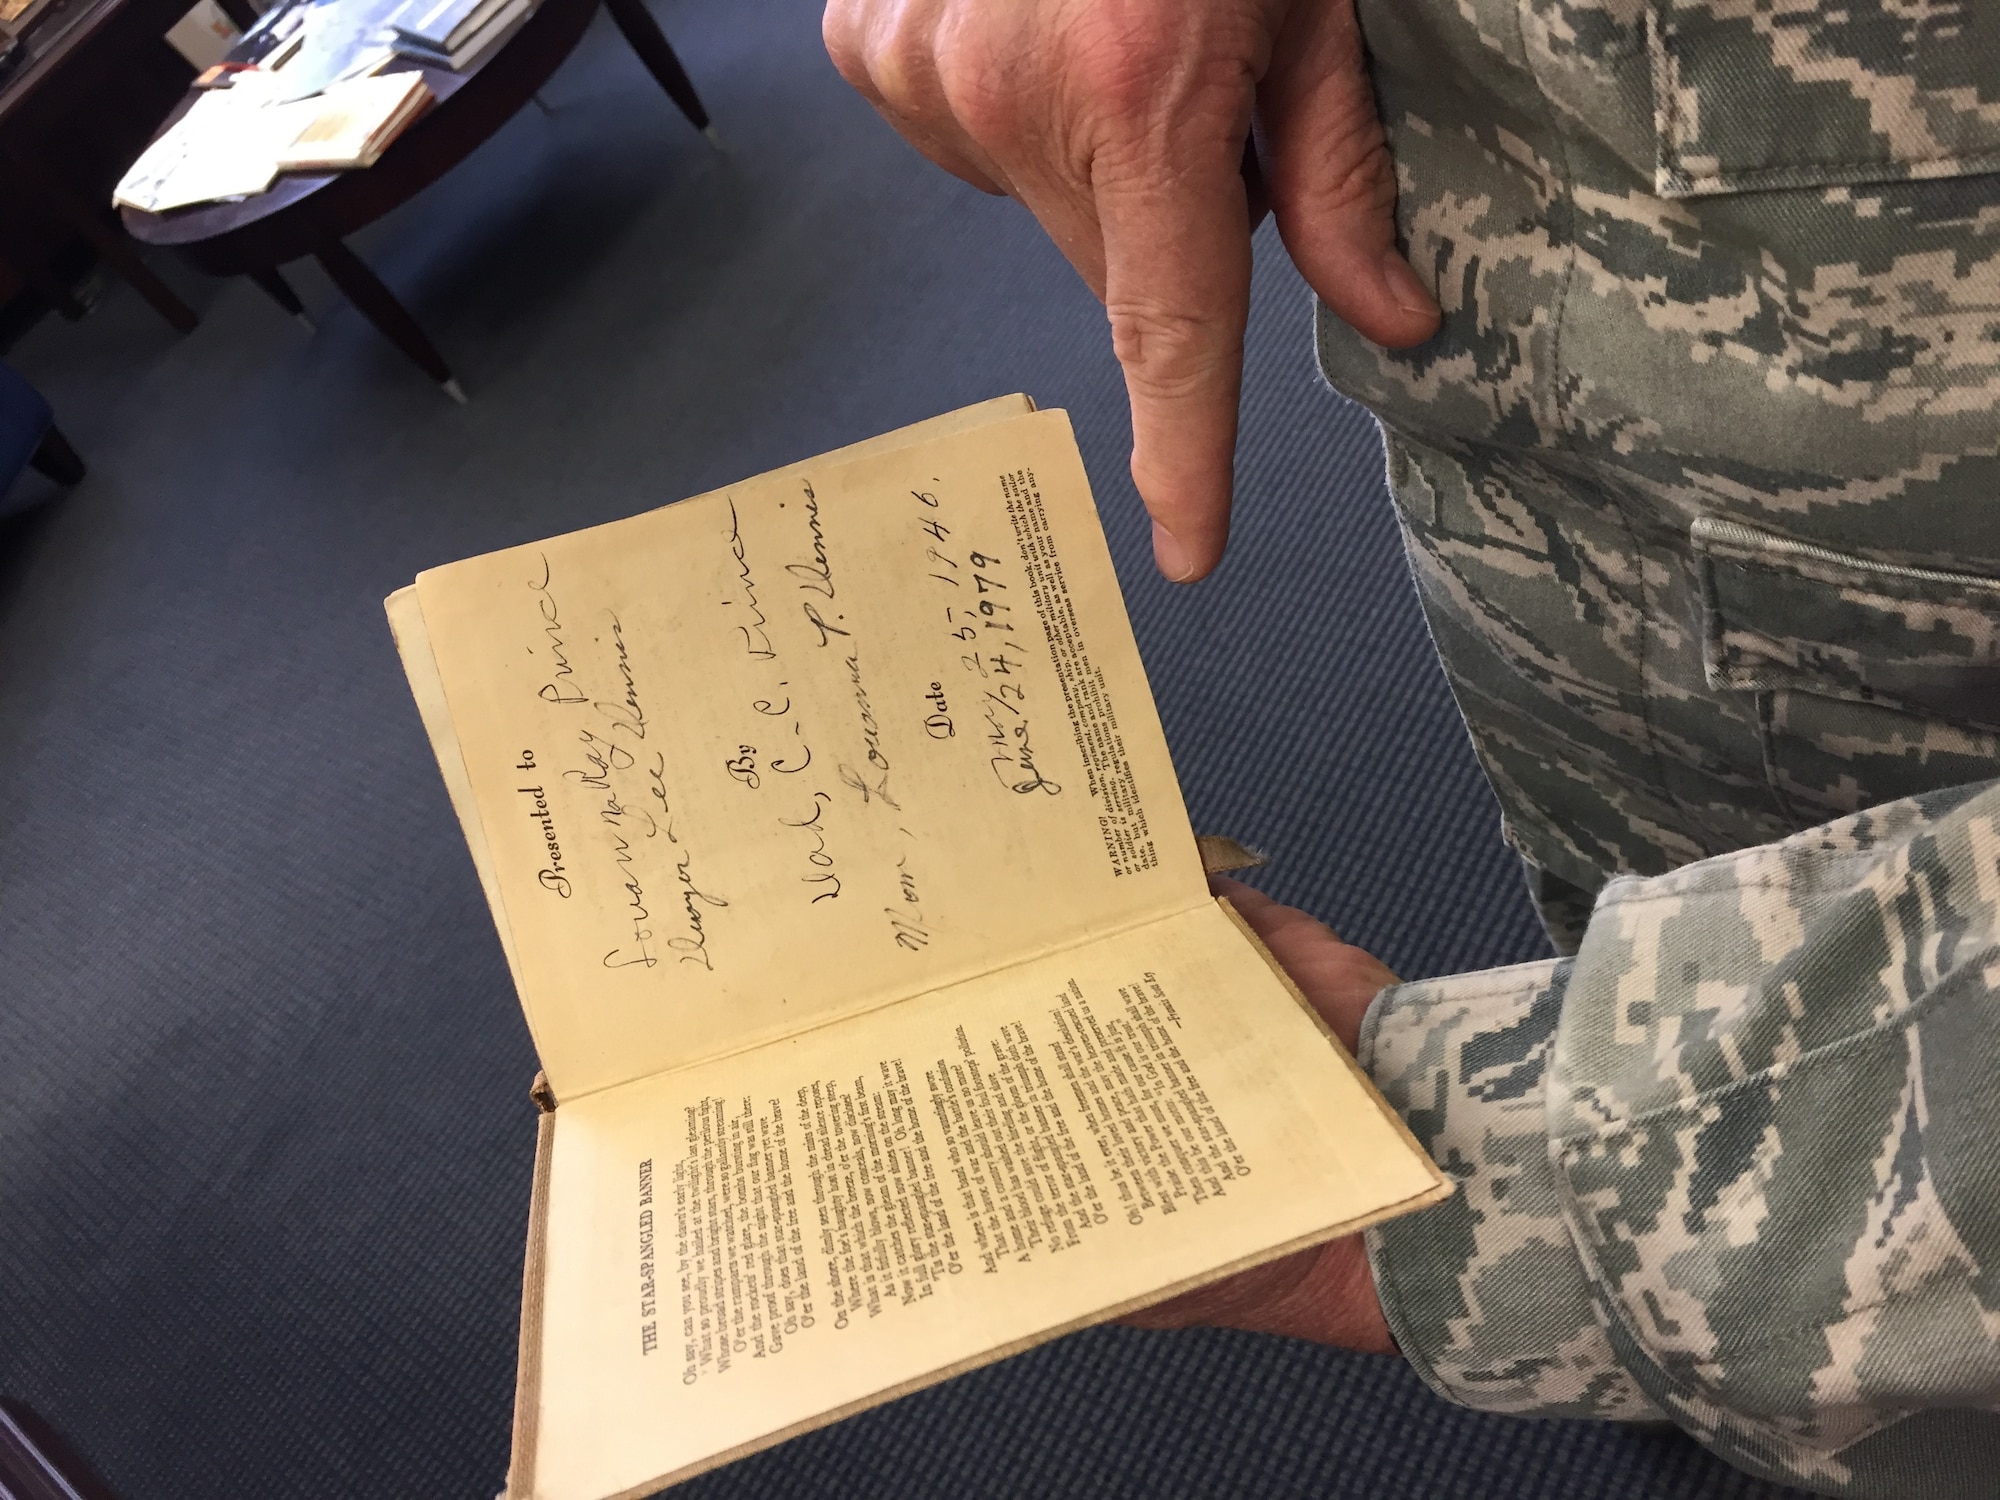 Maj. Gen. Dwyer Dennis, program executive officer for the Command, Control, Communications, Intelligence and Networks Directorate at Hanscom Air Force Base, Mass., holds a daily prayer devotionals in his office, April 6, 2018. The devotional belonged to his maternal grandfather, who was a U.S. Army Chaplain during World War II, serving in both theaters. Dennis is set to retire April 13 after serving 35 years as a U.S. Air Force officer. (U.S. Air Force Photo by Benjamin Newell)